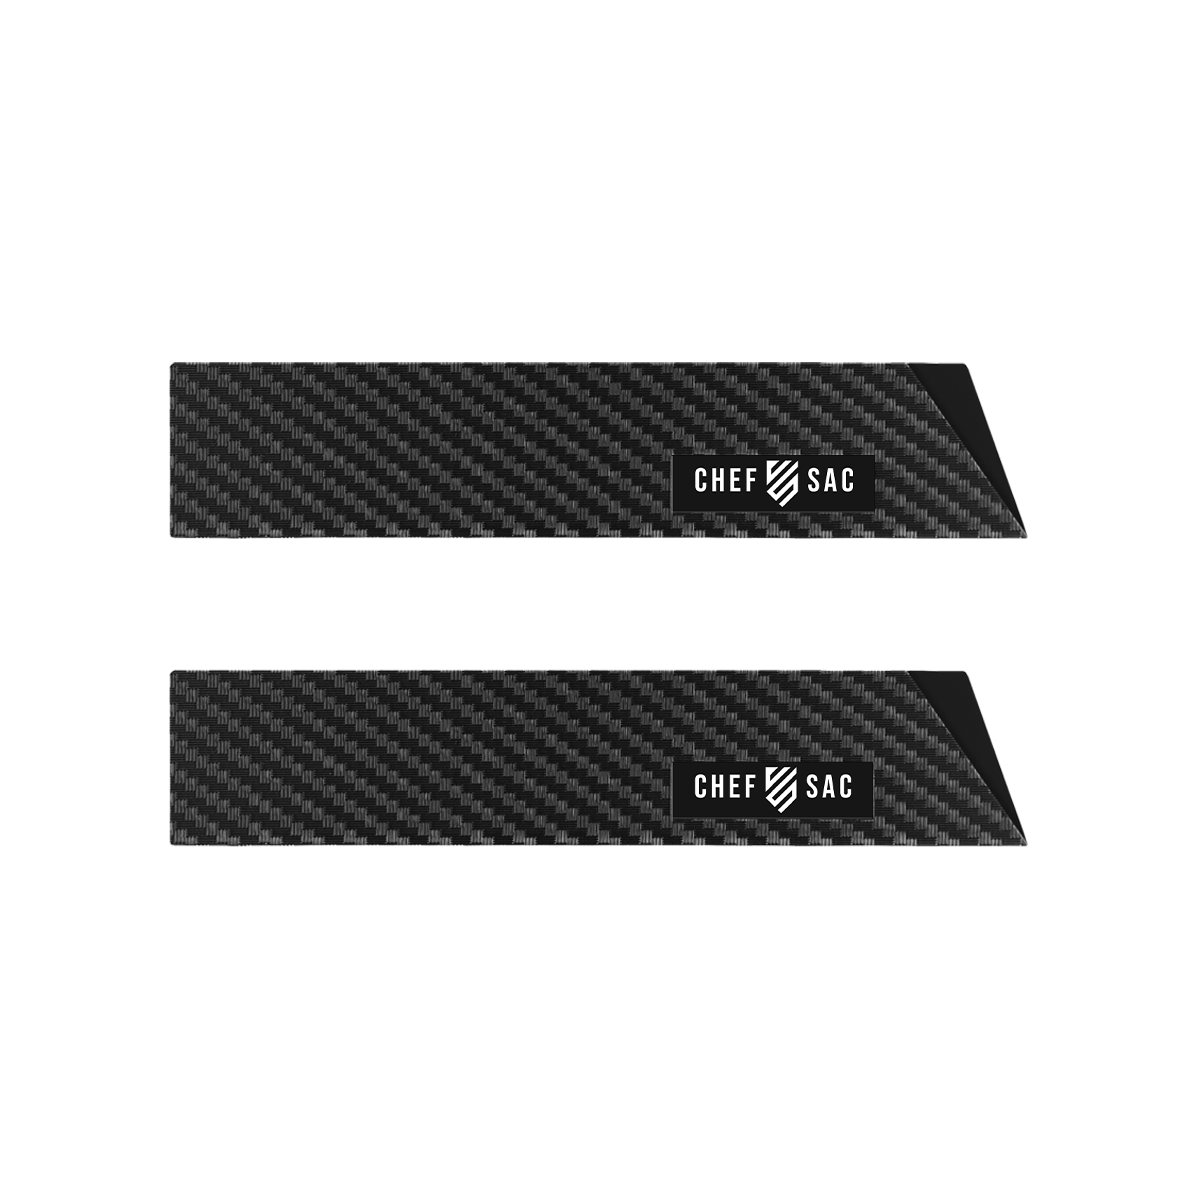 2-piece Universal Knife Edge Guards 8.5 and 10.5 Are More Durable